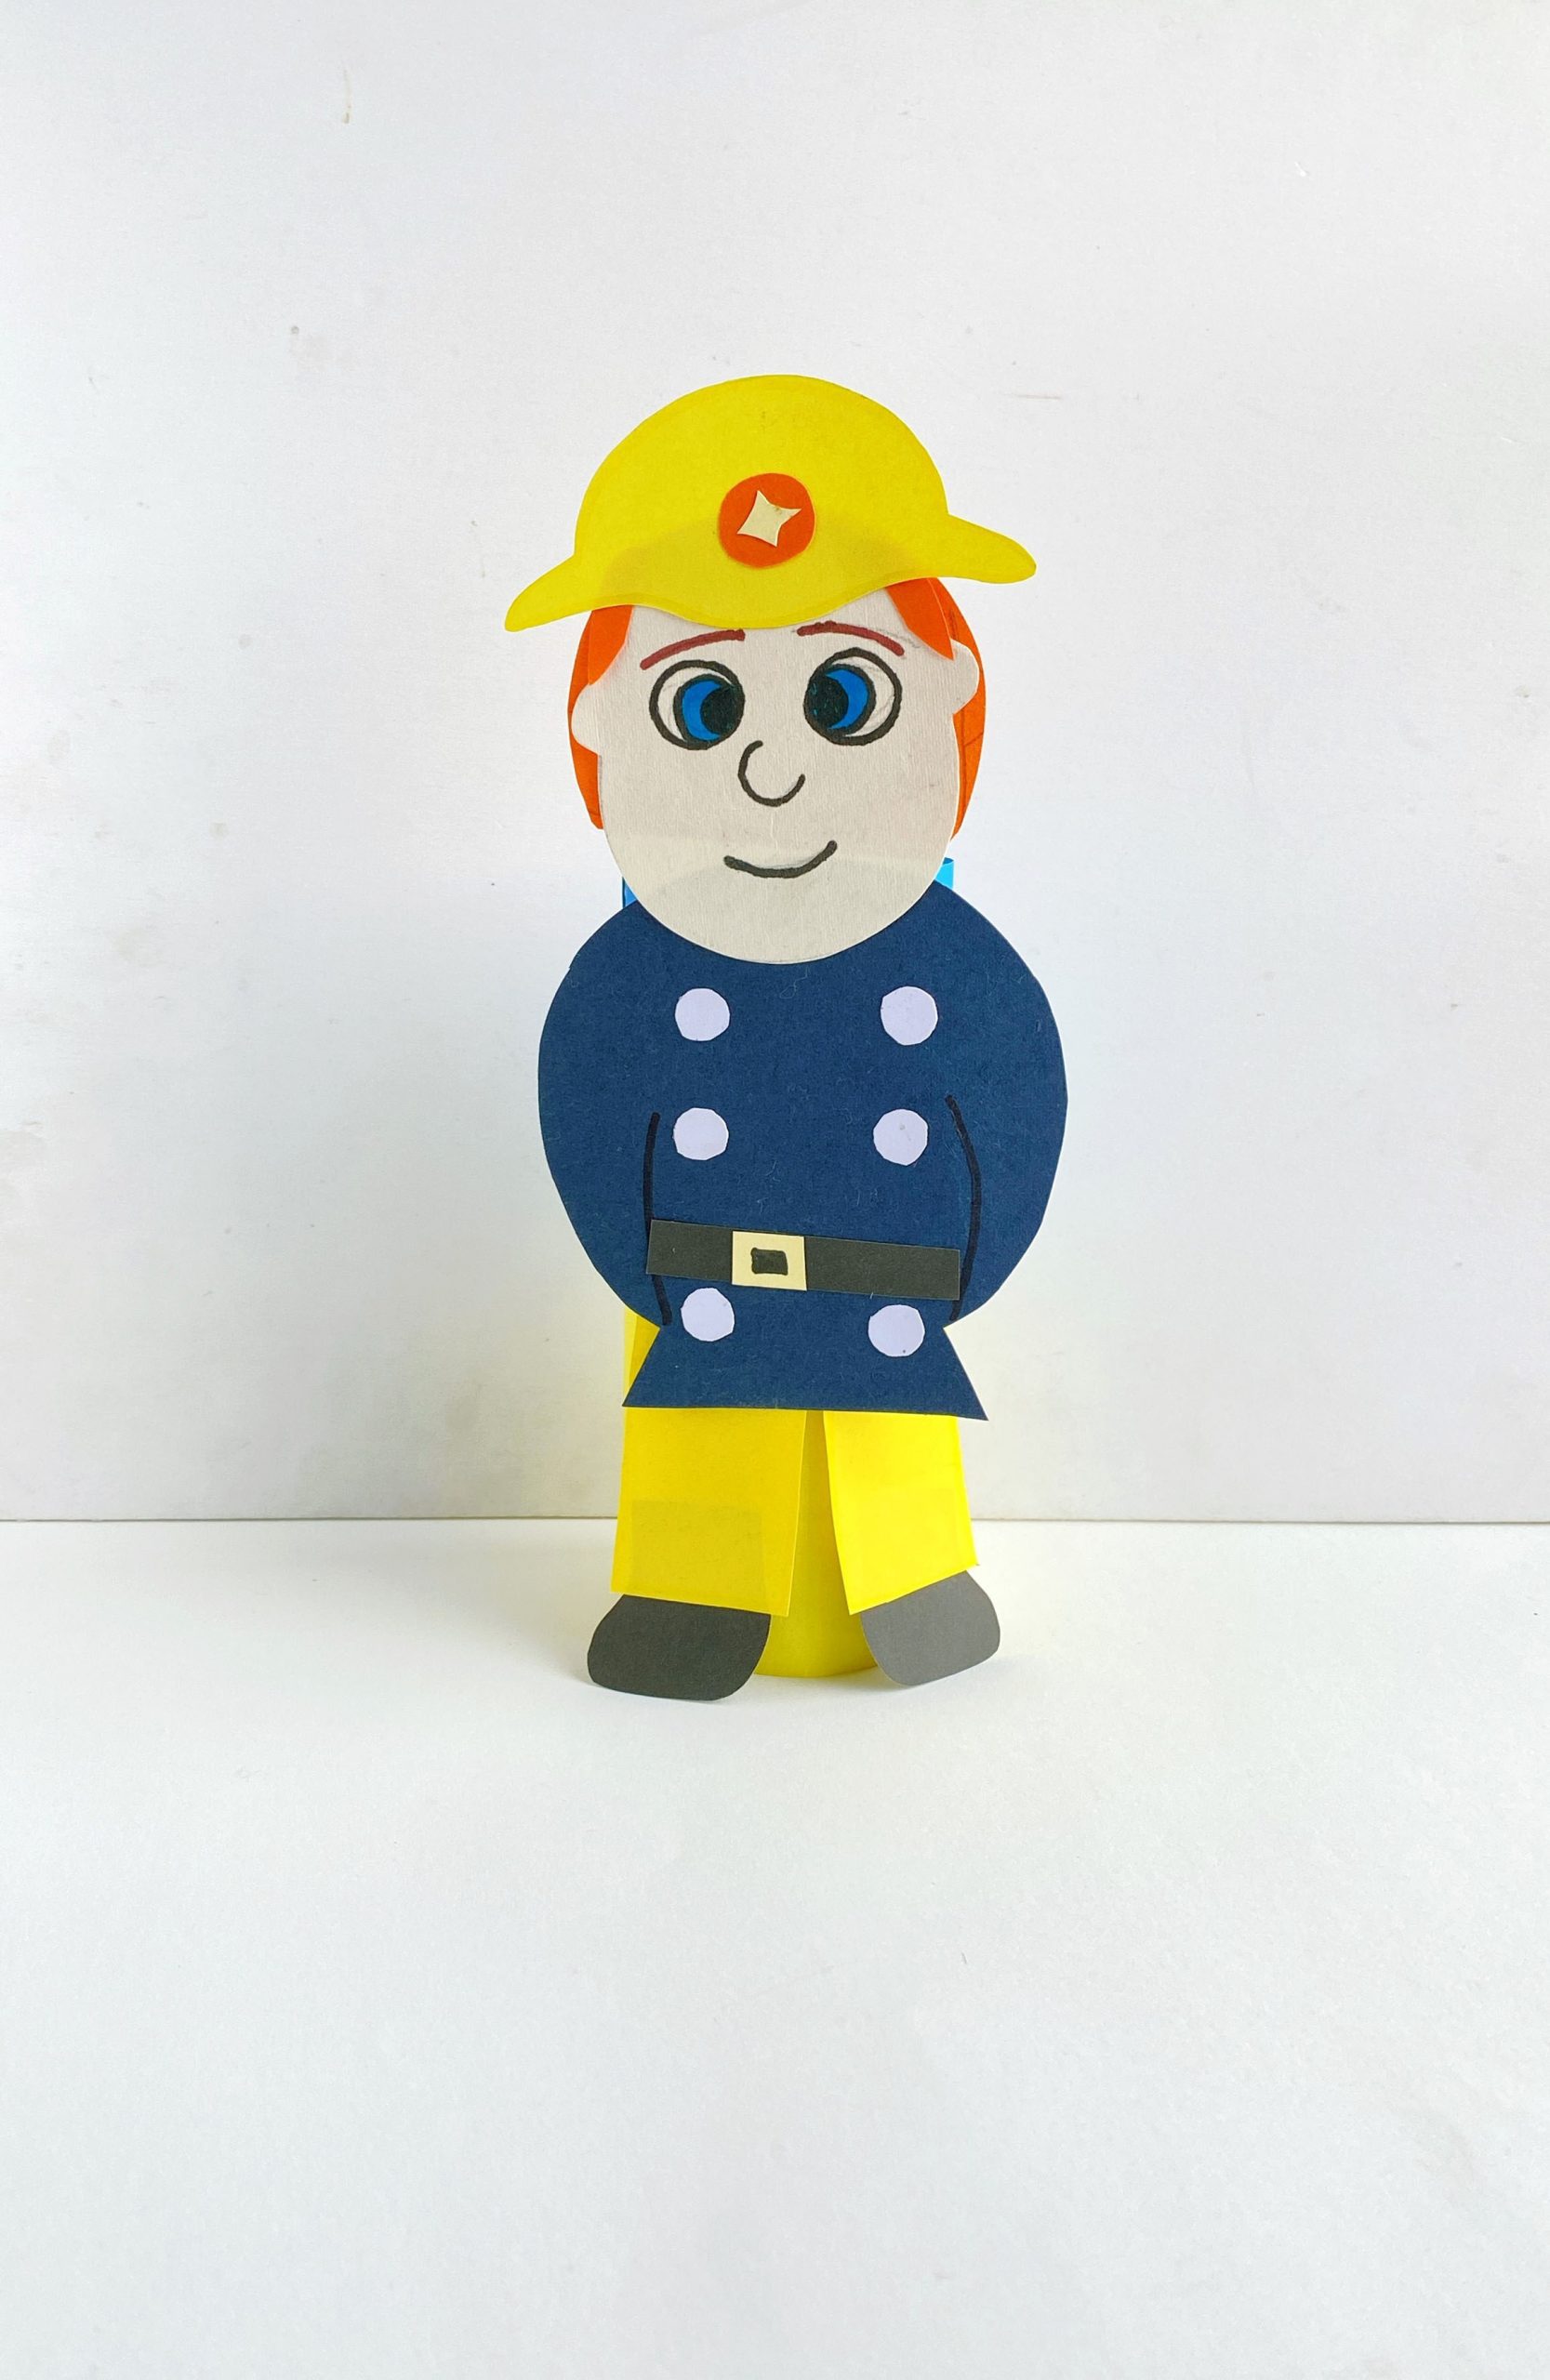 Fireman Sam Craft with Toilet Paper Roll